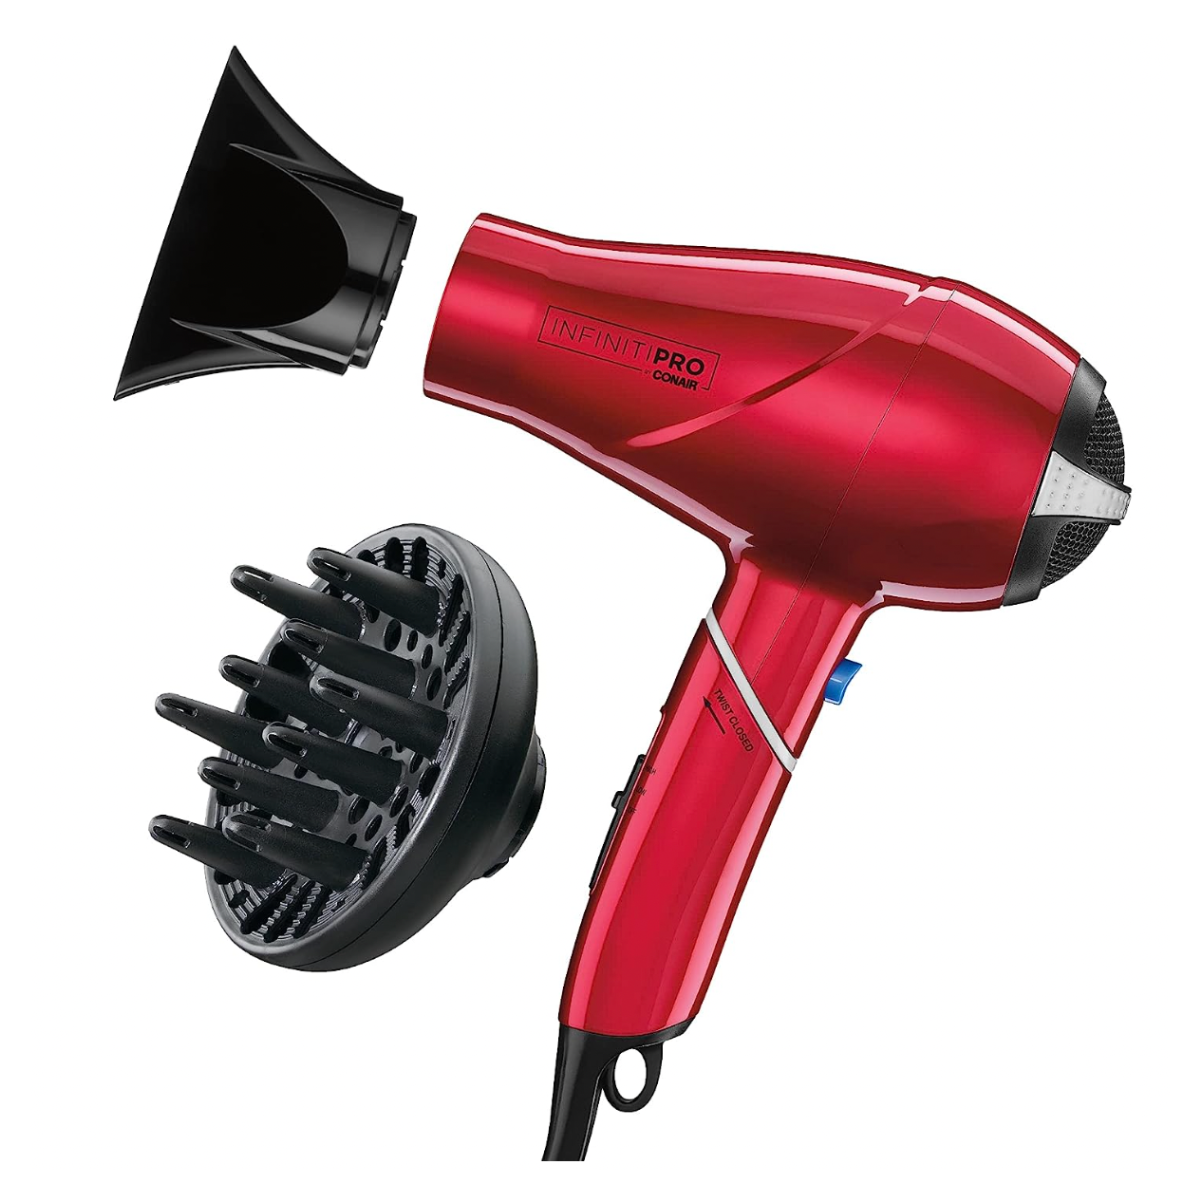 <p>Do you need to spend a ton on a travel hair dryer? Absolutely not—and this drugstore pick is proof. This attractive red dryer is a great under-$50 find that has many of the same features as its more expensive counterparts, including a folding handle, a powerful motor, and ionic technology. It even comes with a concentrator nozzle for drying long hair and a diffuser attachment for curly hair types.</p> <ul> <li><strong>Pros:</strong> Multiple heat settings, comes with attachments for versatile hair styling, ionic technology</li> <li><strong>Cons:</strong> Not dual-voltage, on the heavier side</li> <li><strong>Weight:</strong> 2 pounds</li> <li><strong>Dual Voltage:</strong> No</li> </ul> $45, Amazon. <a href="https://www.amazon.com/INFINITIPRO-CONAIR-Compact-Travel-Folding/dp/B004INUY06">Get it now!</a><p>Sign up for today’s biggest stories, from pop culture to politics.</p><a href="https://www.glamour.com/newsletter/news?sourceCode=msnsend">Sign Up</a>